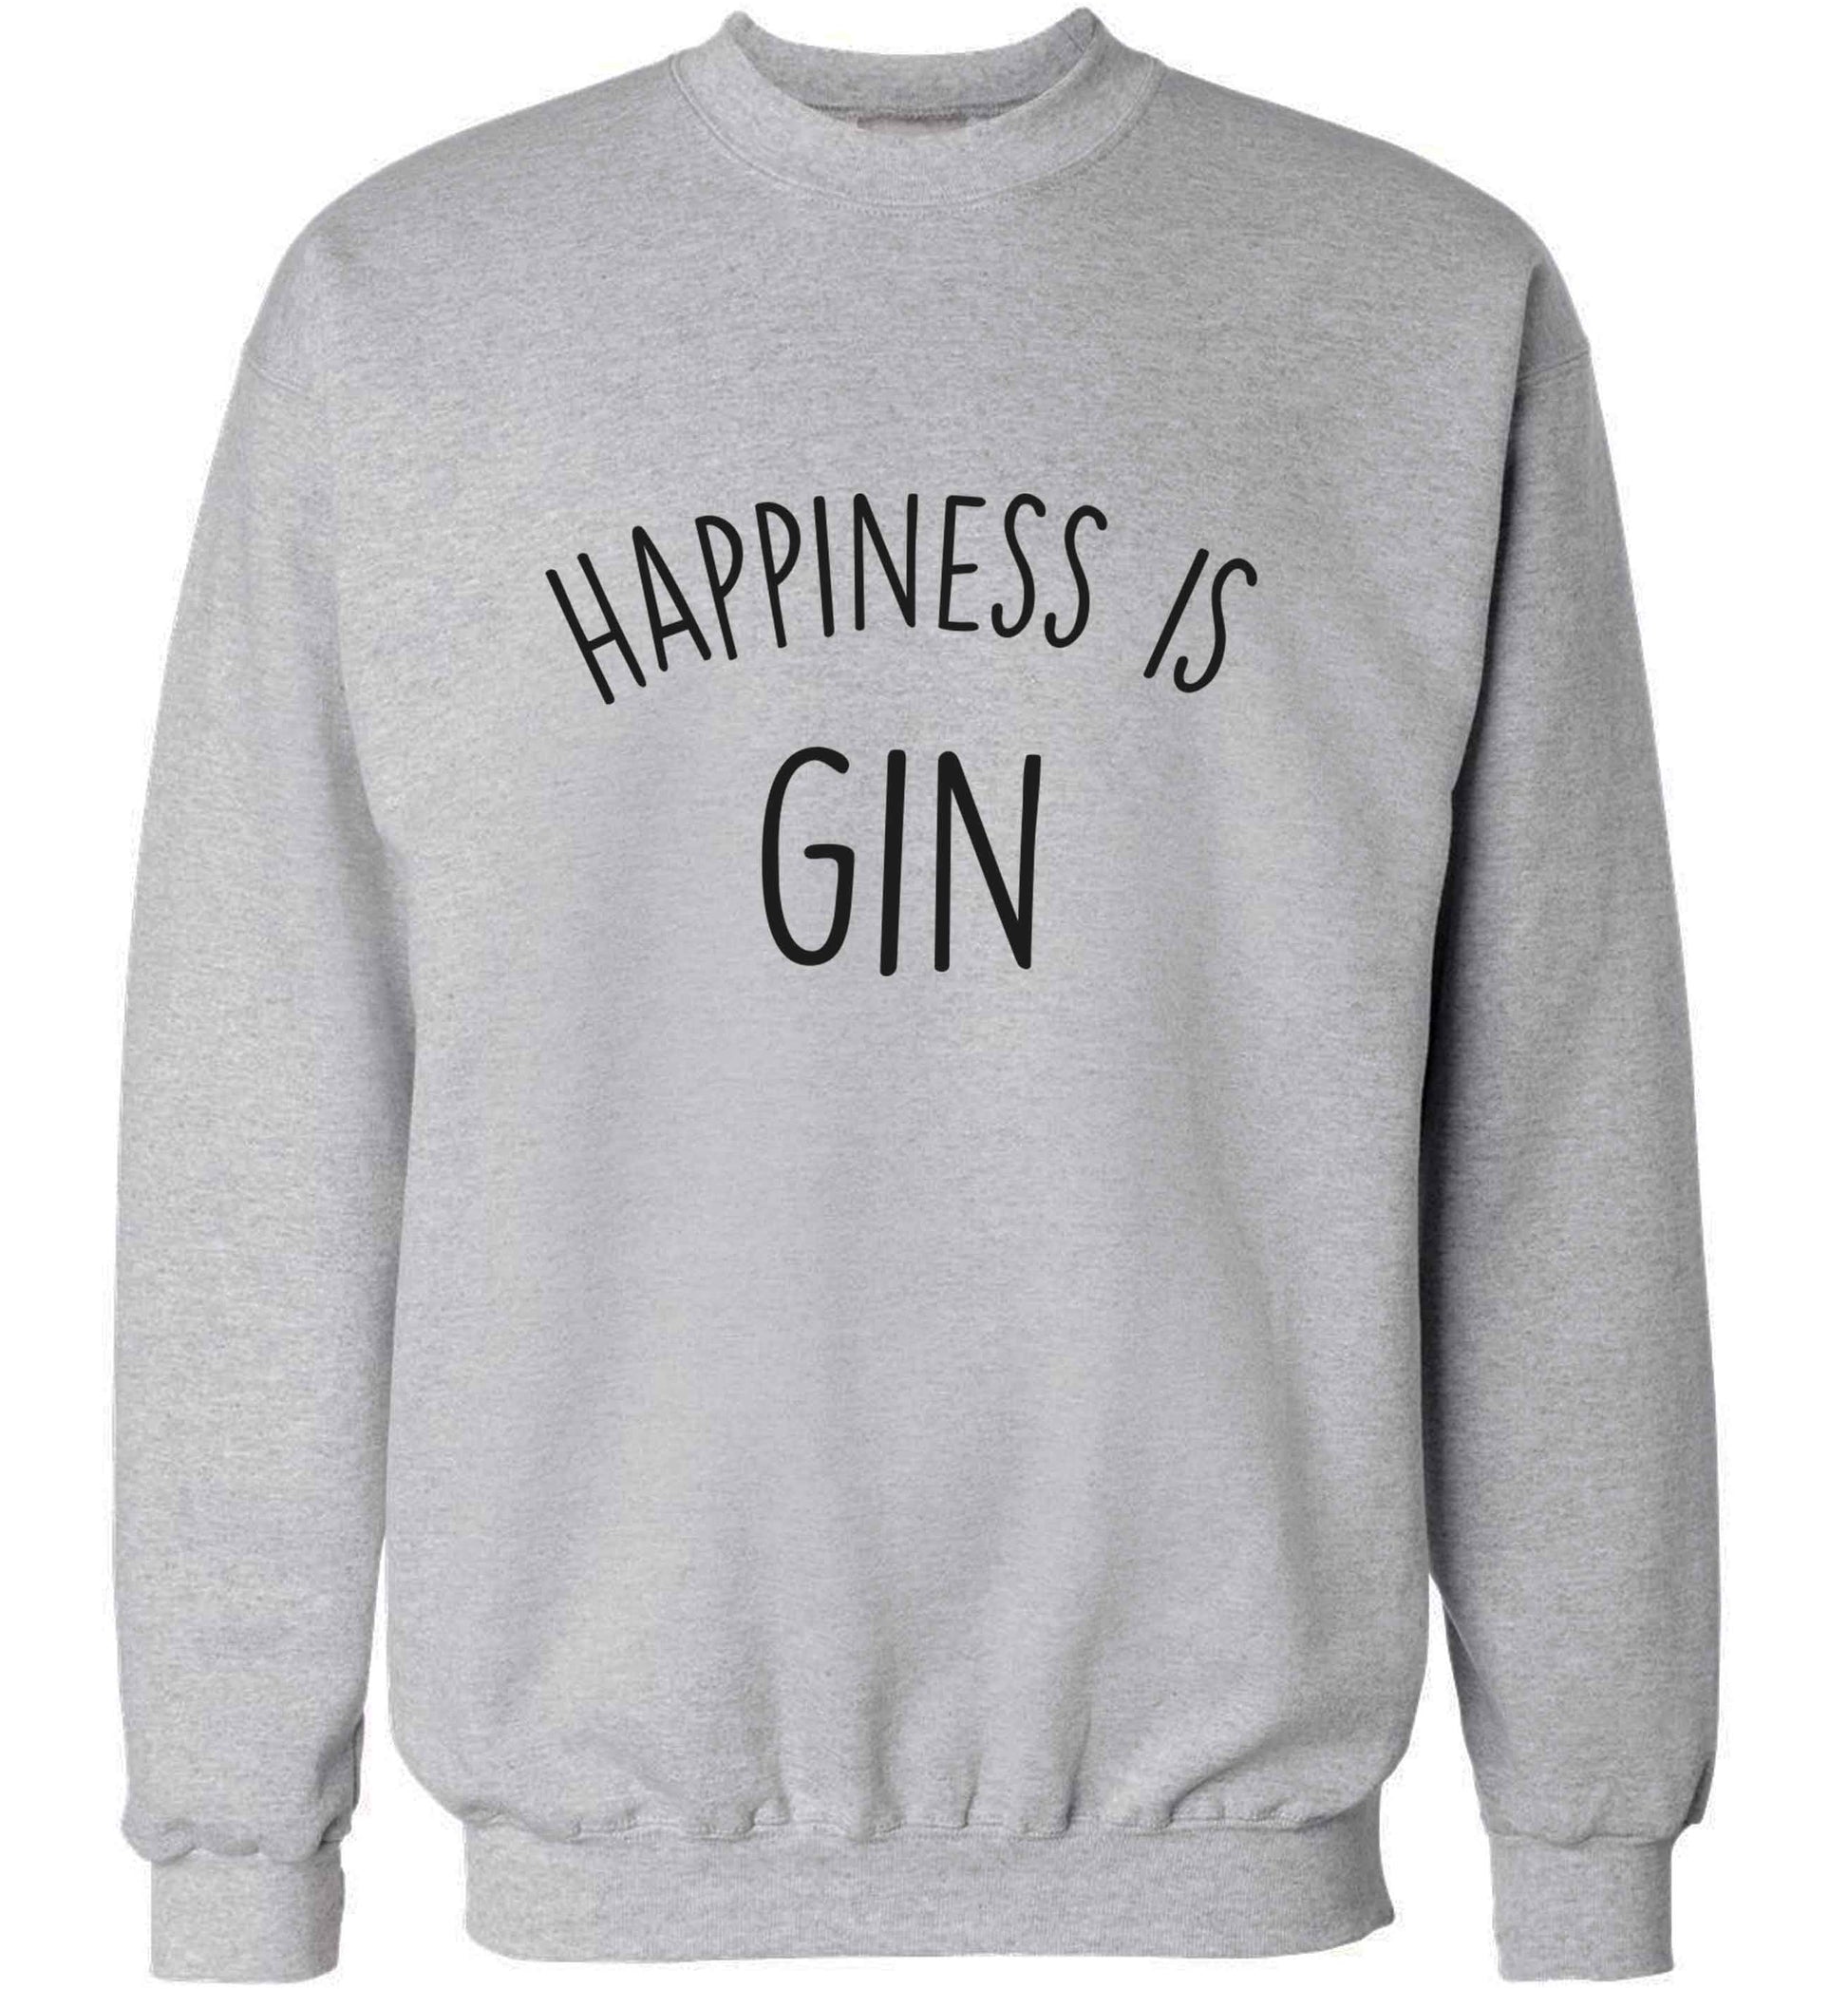 Happiness is gin adult's unisex grey sweater 2XL